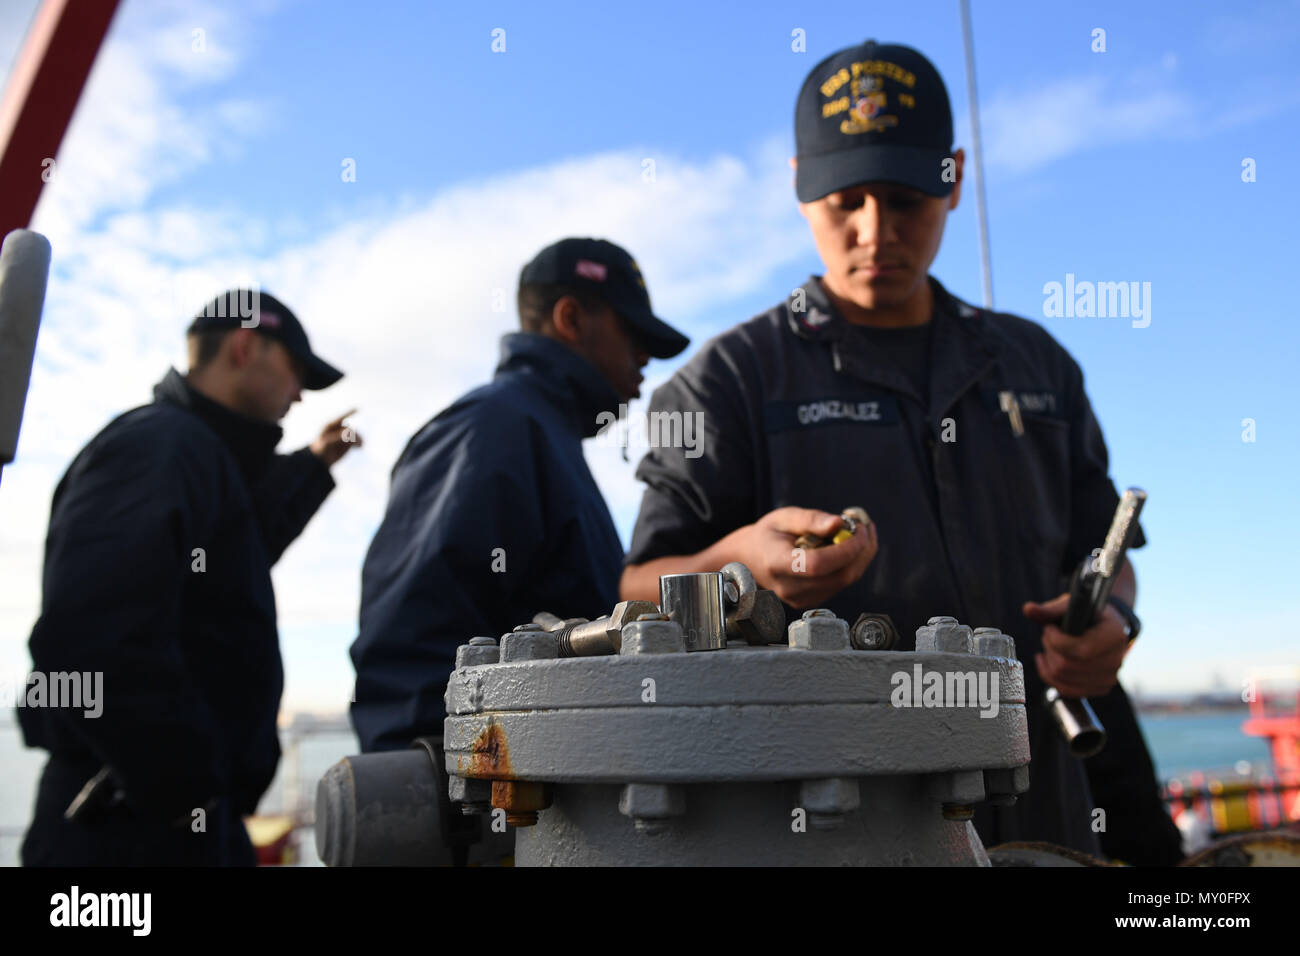 161219-N-JI086-022 - VALENCIA, Spain (Dec. 20, 2016) Petty Officer 3rd Class Enrique Gonzalez, from San Bernardino, Calif., checks his tools aboard the guided-missile destroyer USS Porter (DDG 78) as the ship prepares to take on fuel pier-side in Valencia, Spain, Dec. 20, 2016. Porter, forward-deployed to Rota, Spain, is conducting naval operations in the U.S. 6th Fleet area of operations in support of U.S. national security interests in Europe. (U.S. Navy photo by Seaman Ford Williams/Released) Stock Photo